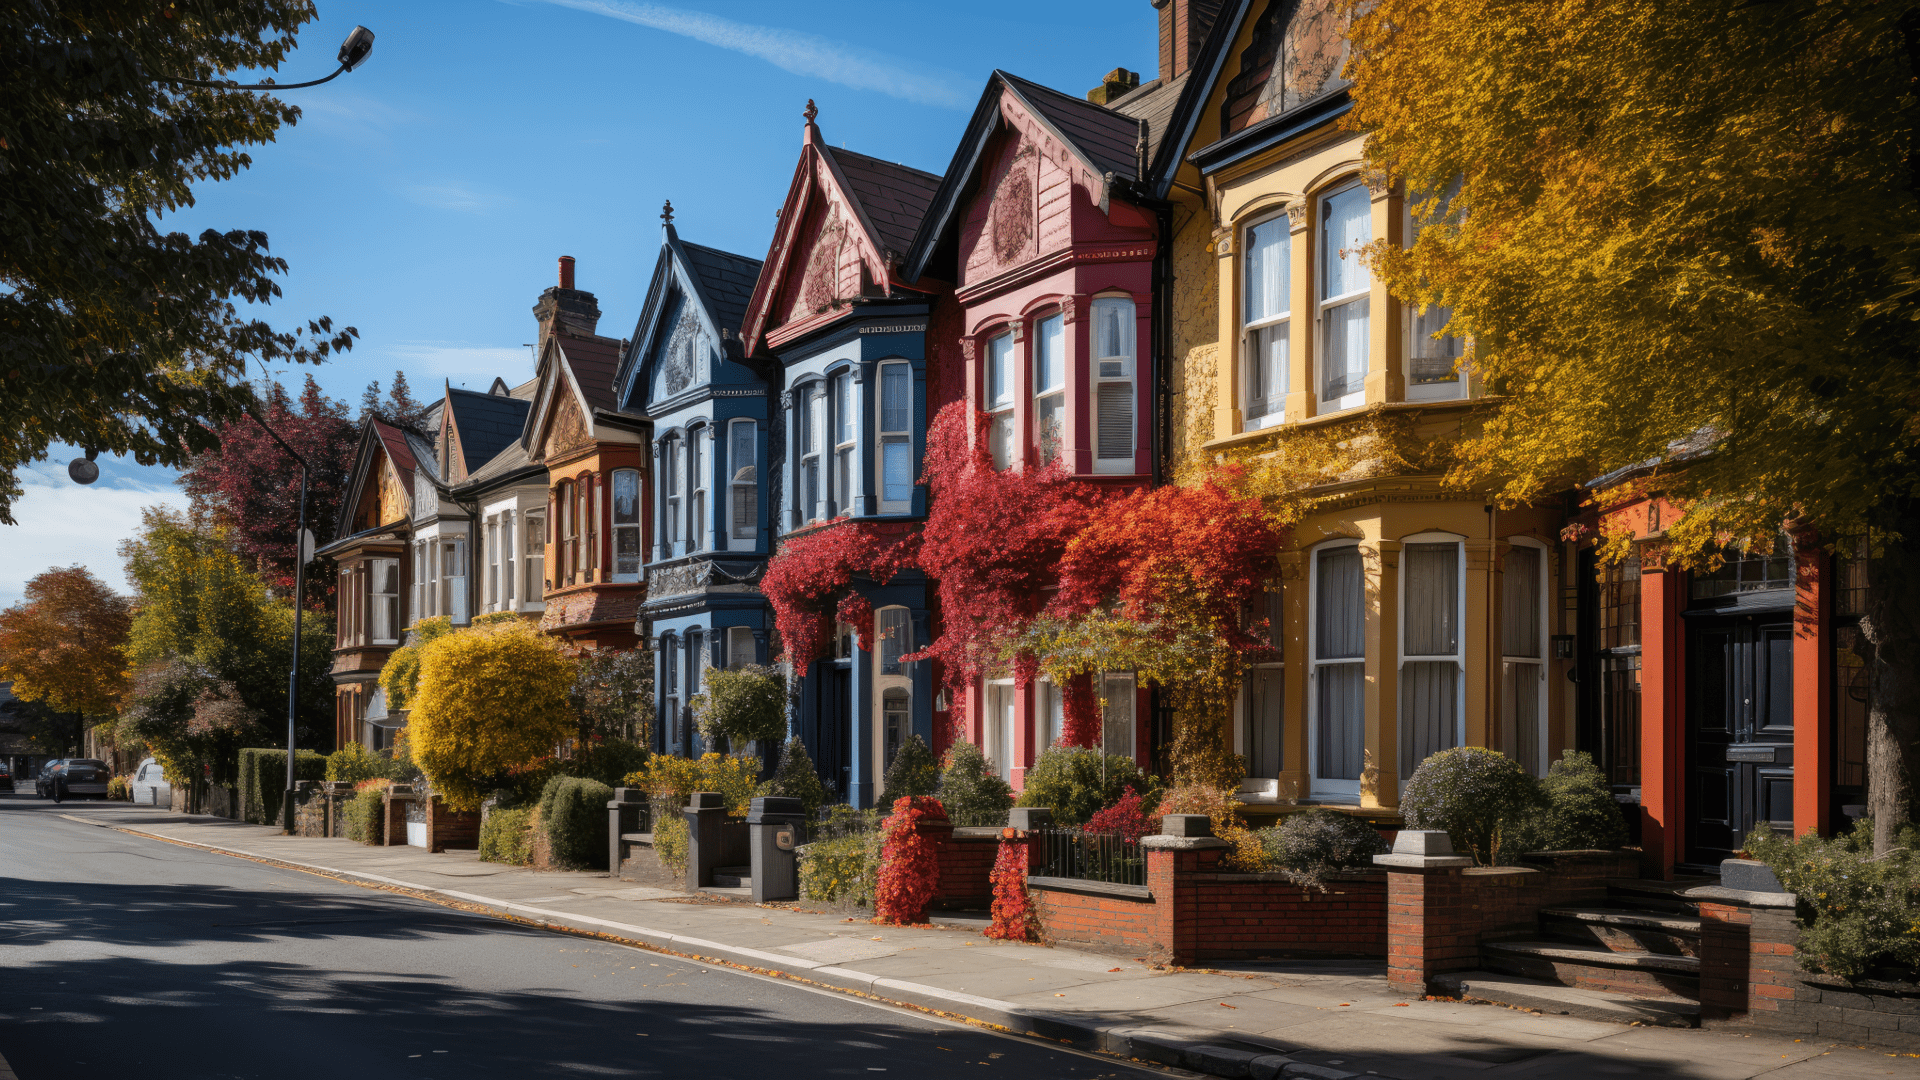 A picturesque row of Victorian townhouses with vibrant autumn foliage, each painted in distinct colors, located on a quiet, sunlit street.